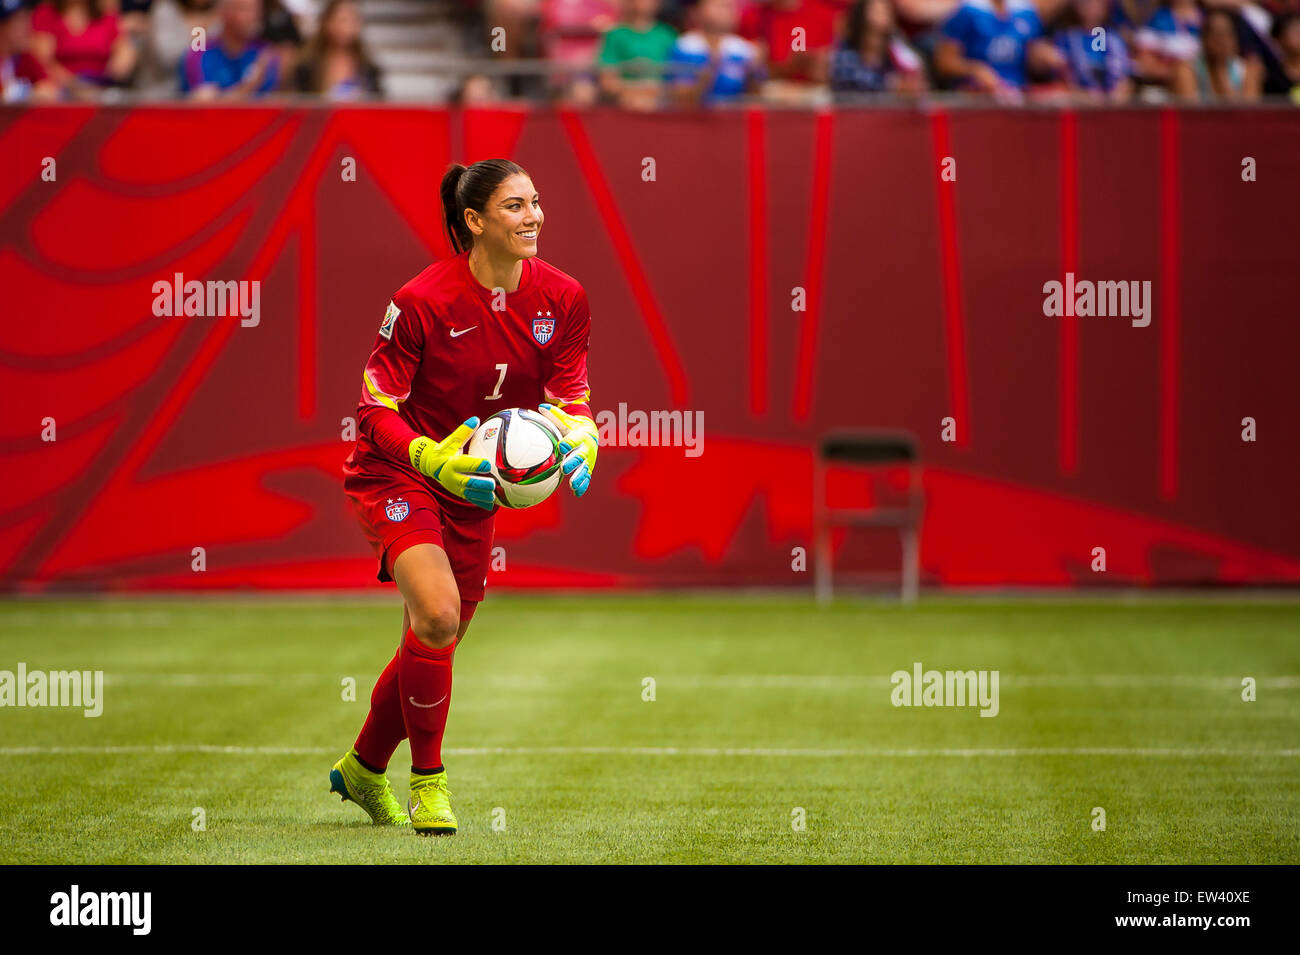 Vancouver, Canada. 16th June, 2015. United States goalkeeper Hope Solo (#1) with the ball following a save during the opening round match between Nigeria and the United States at the FIFA Women's World Cup Canada 2015 at BC Place Stadium. The United States won the match 1-0. Credit:  Matt Jacques/Alamy Live News Stock Photo